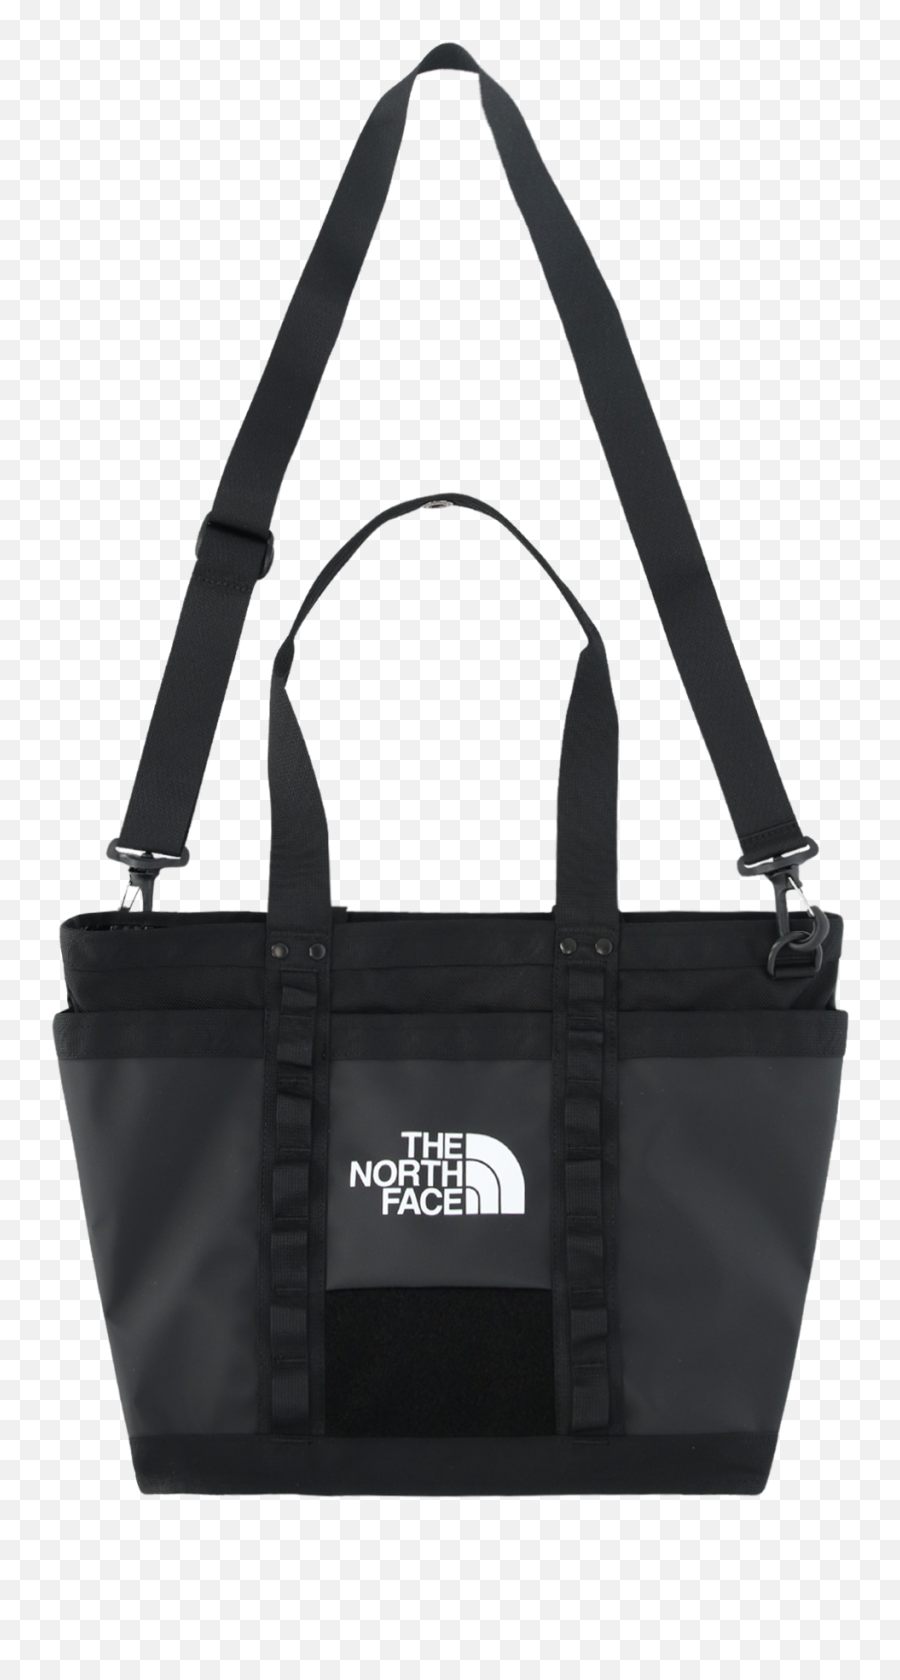 Tote Bag North Face Cheaper Than Retail Priceu003e Buy Clothing - North Face Explore Utility Tote Price Philippines Emoji,Northface Logo